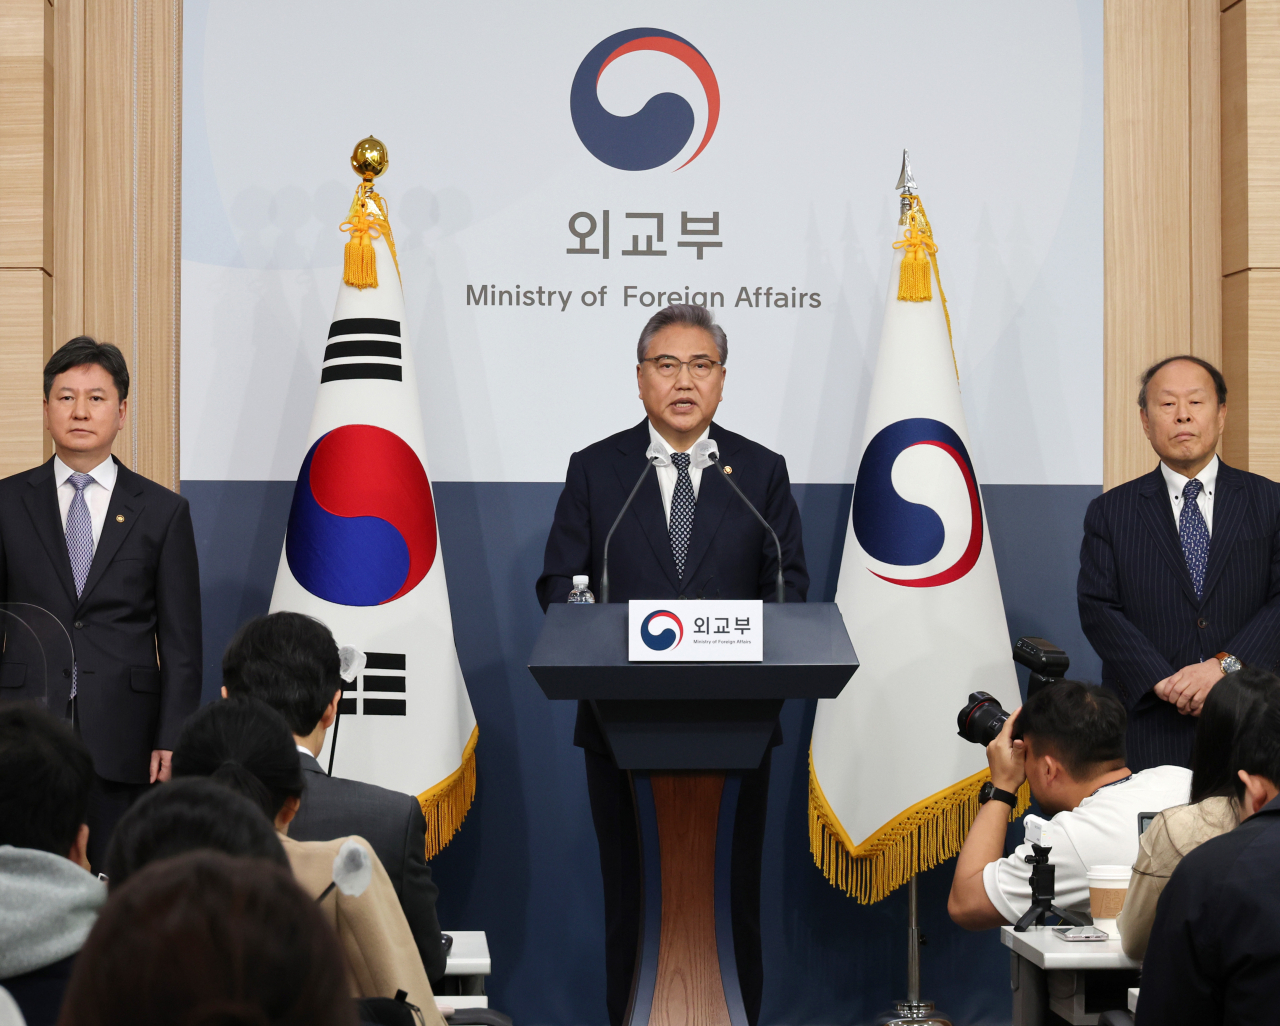 Foreign Minister Park Jin (center) speaks during a press conference at the Foreign Ministry in Seoul on Monday, about the South Korean government’s solution for addressing the issue of compensation for Japan’s wartime forced labor. (Joint Press Corps)